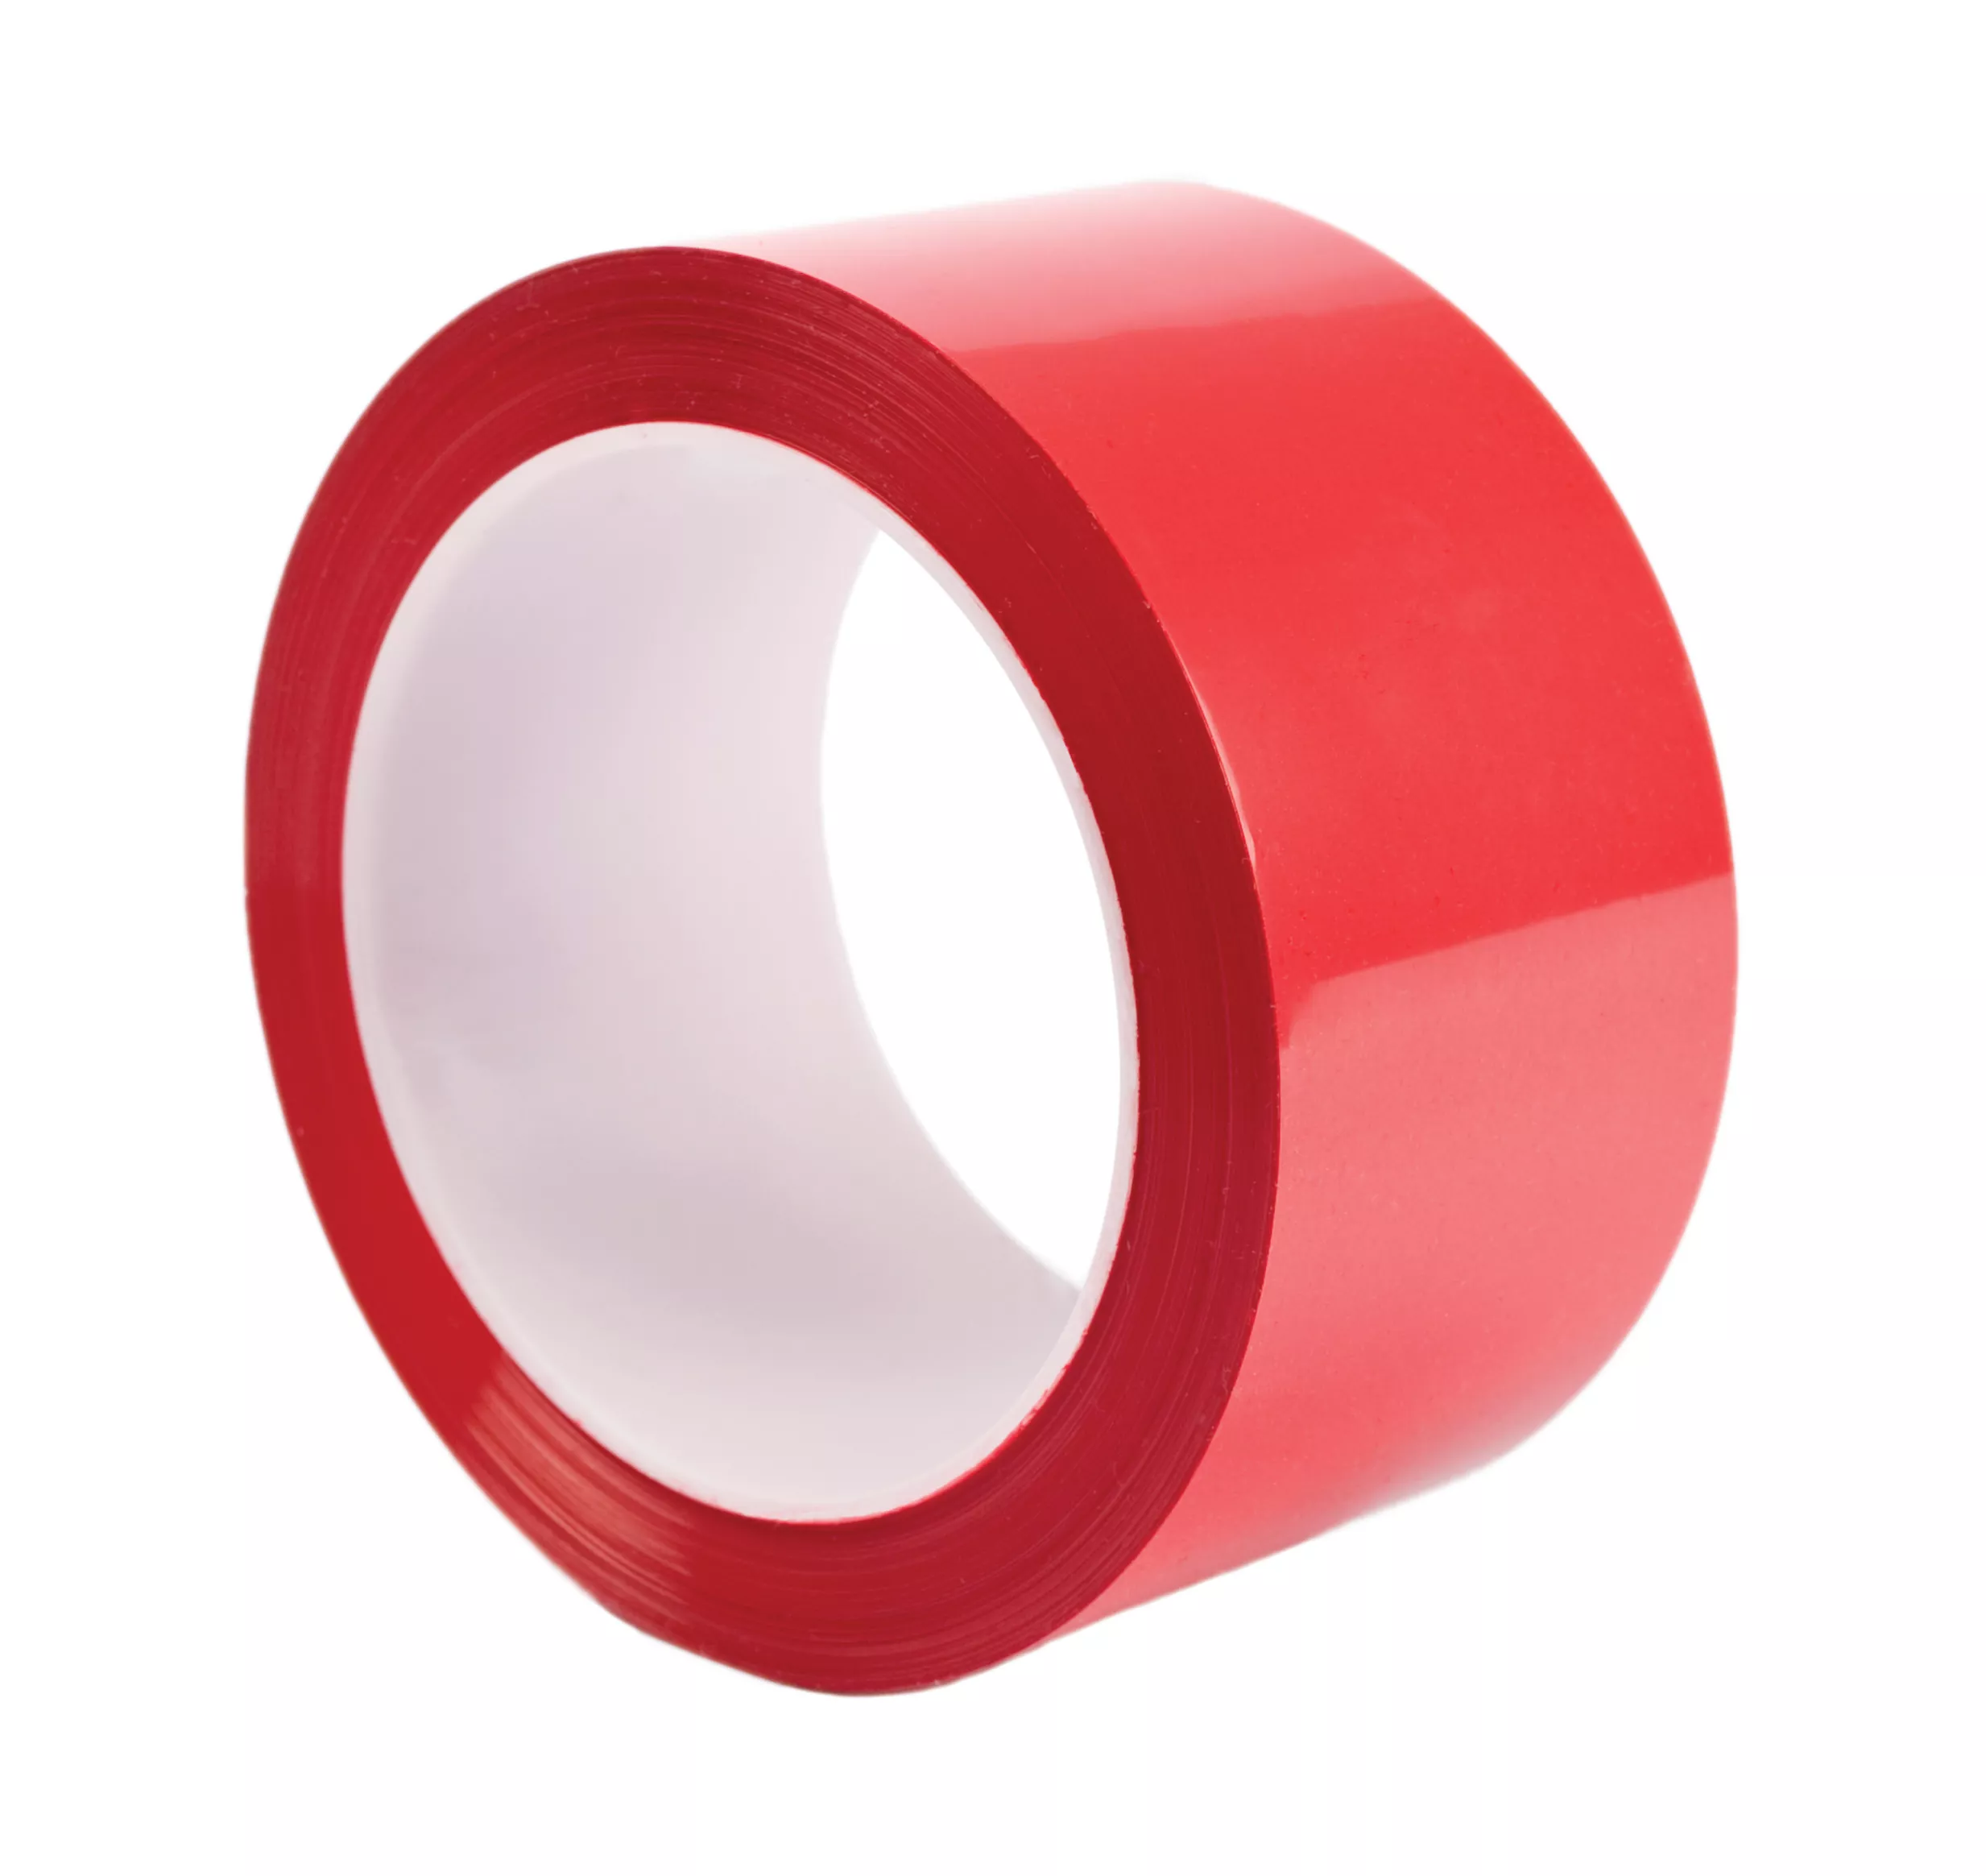 3M™ Polyester Film Tape 850, Red, 18 in x 72 yd, 1.9 mil, 1 Roll/Case